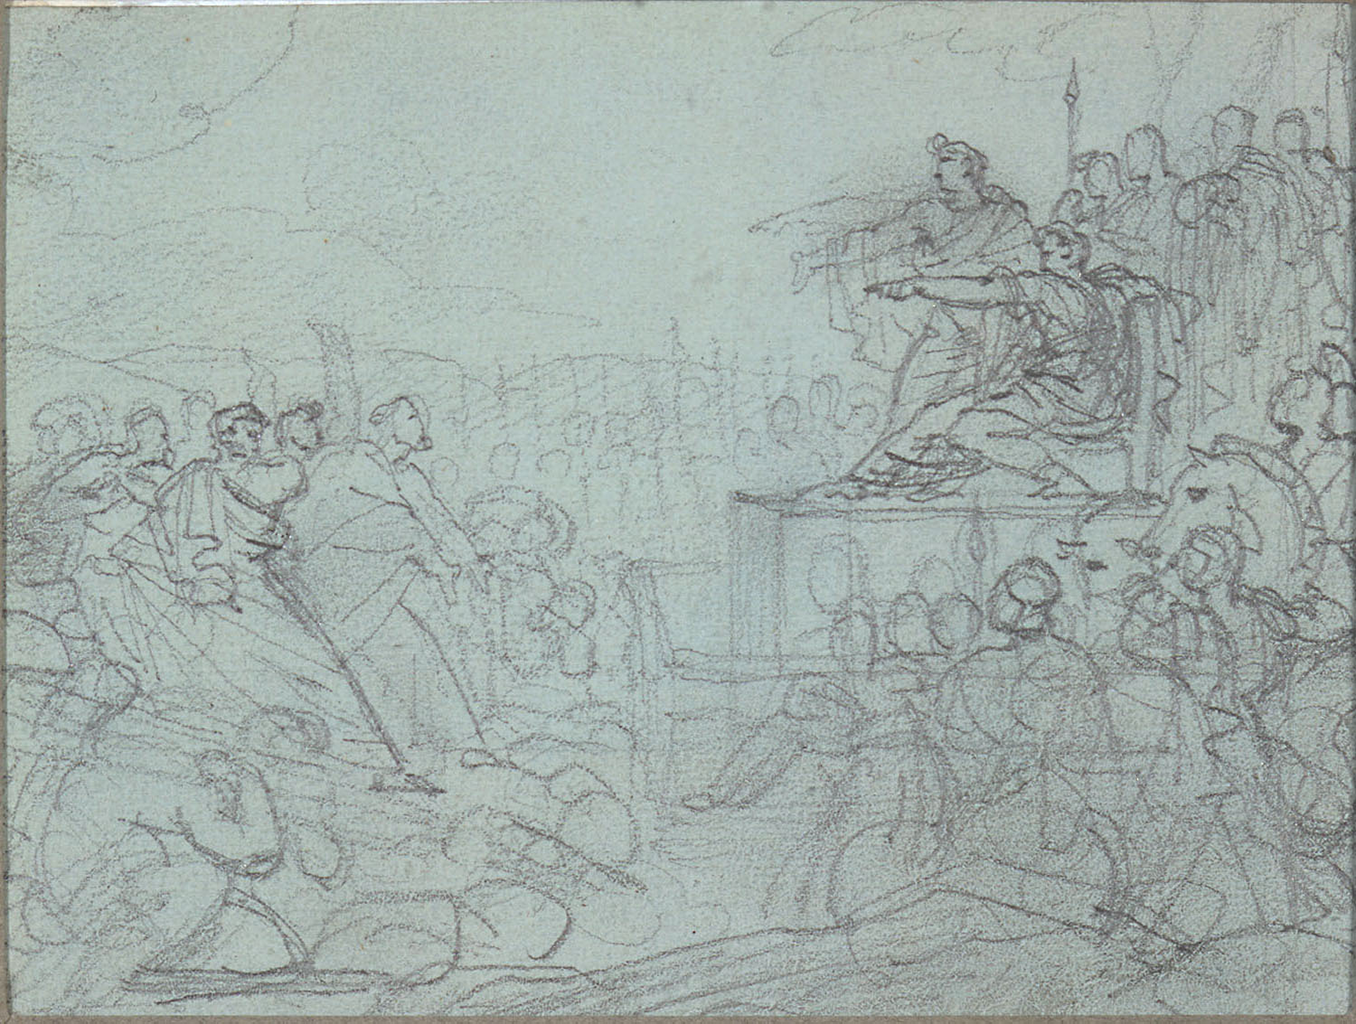 A sketch of a figure sitting on a chair overlooking a large crowd of people. He is seen pointing into the crowd. The sky has a few clouds, and the background seemingly has more people watching.